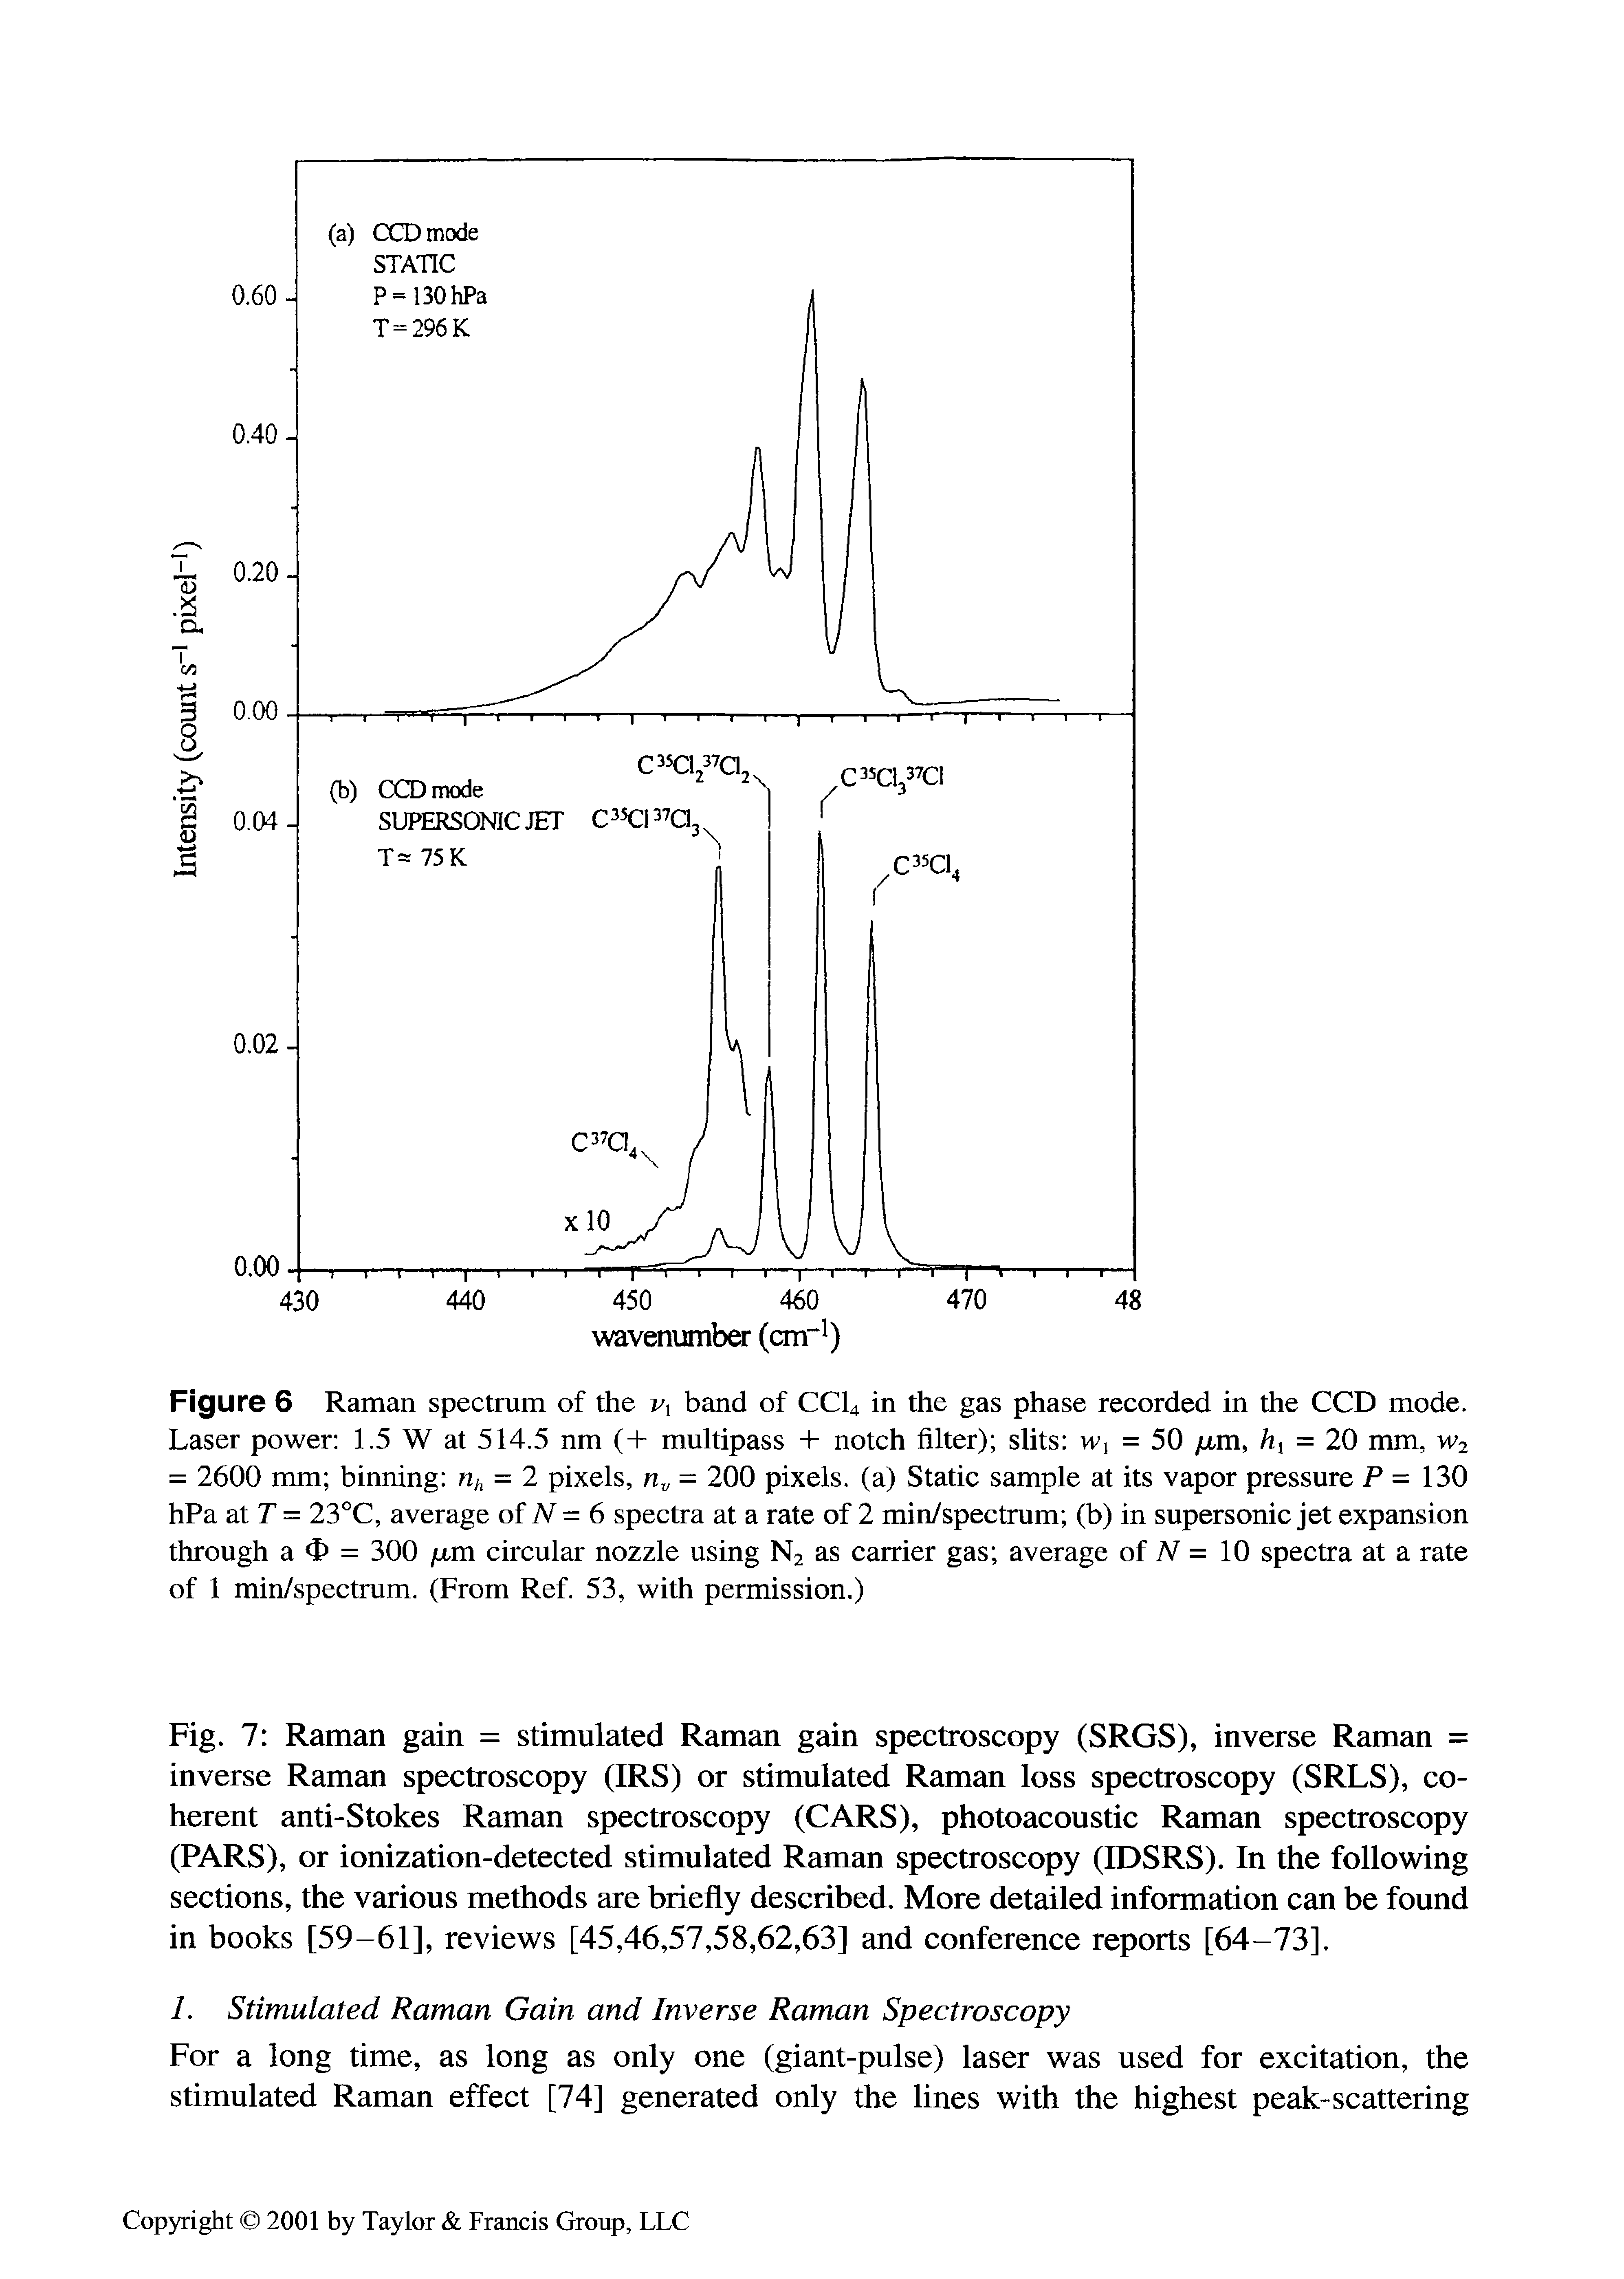 Fig. 7 Raman gain = stimulated Raman gain spectroscopy (SRGS), inverse Raman = inverse Raman spectroscopy (IRS) or stimulated Raman loss spectroscopy (SRLS), coherent anti-Stokes Raman spectroscopy (CARS), photoacoustic Raman spectroscopy (PARS), or ionization-detected stimulated Raman spectroscopy (IDSRS). In the following sections, the various methods are briefly described. More detailed information can be found in books [59-61], reviews [45,46,57,58,62,63] and conference reports [64-73].